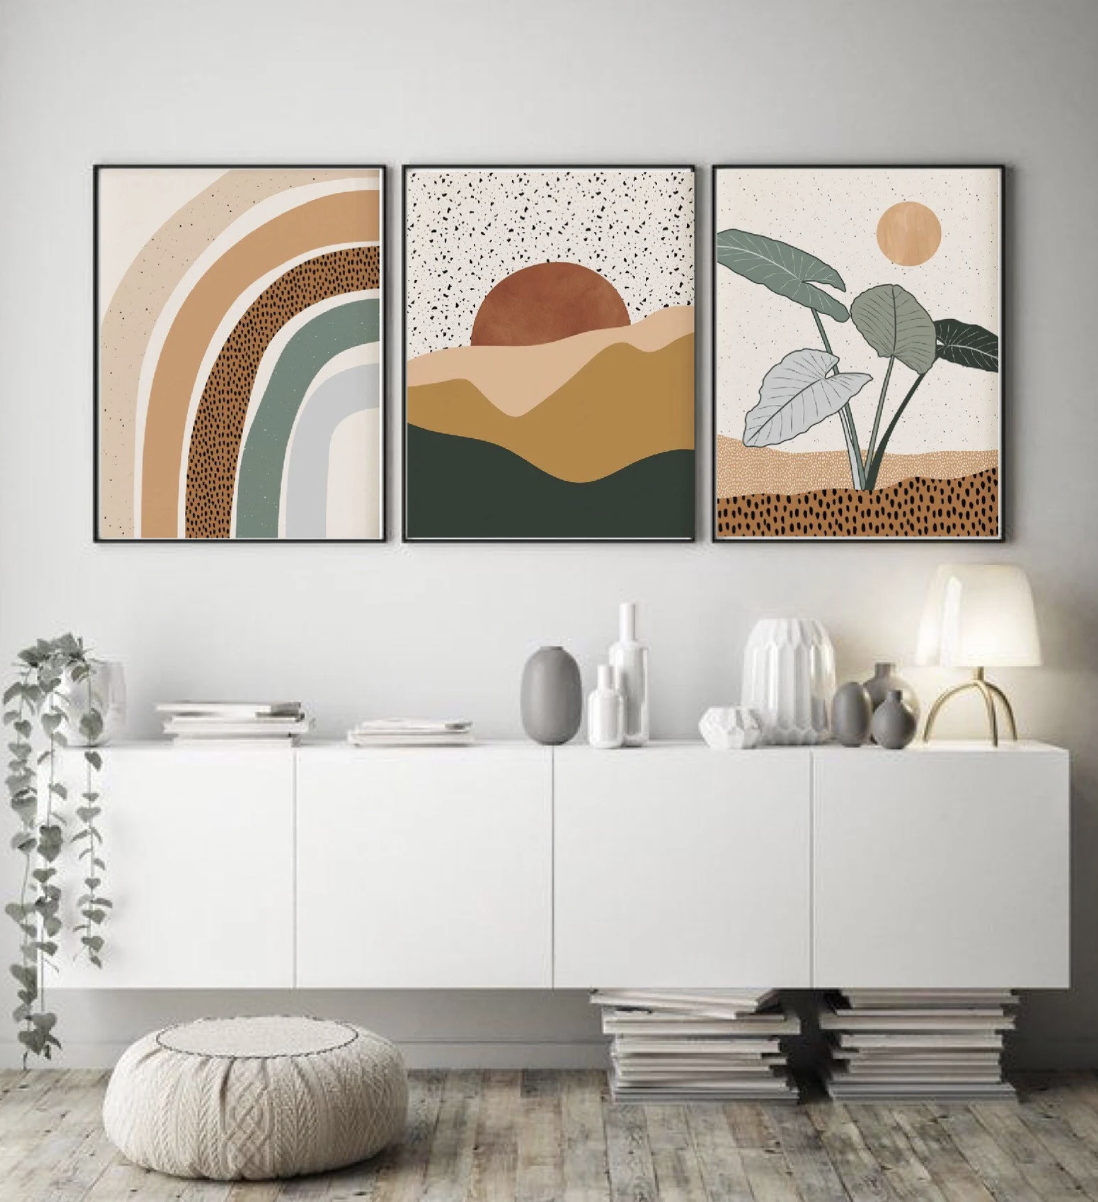 set of three digital abstract prints with a rainbow, plant, and sun framed above a white cabinet